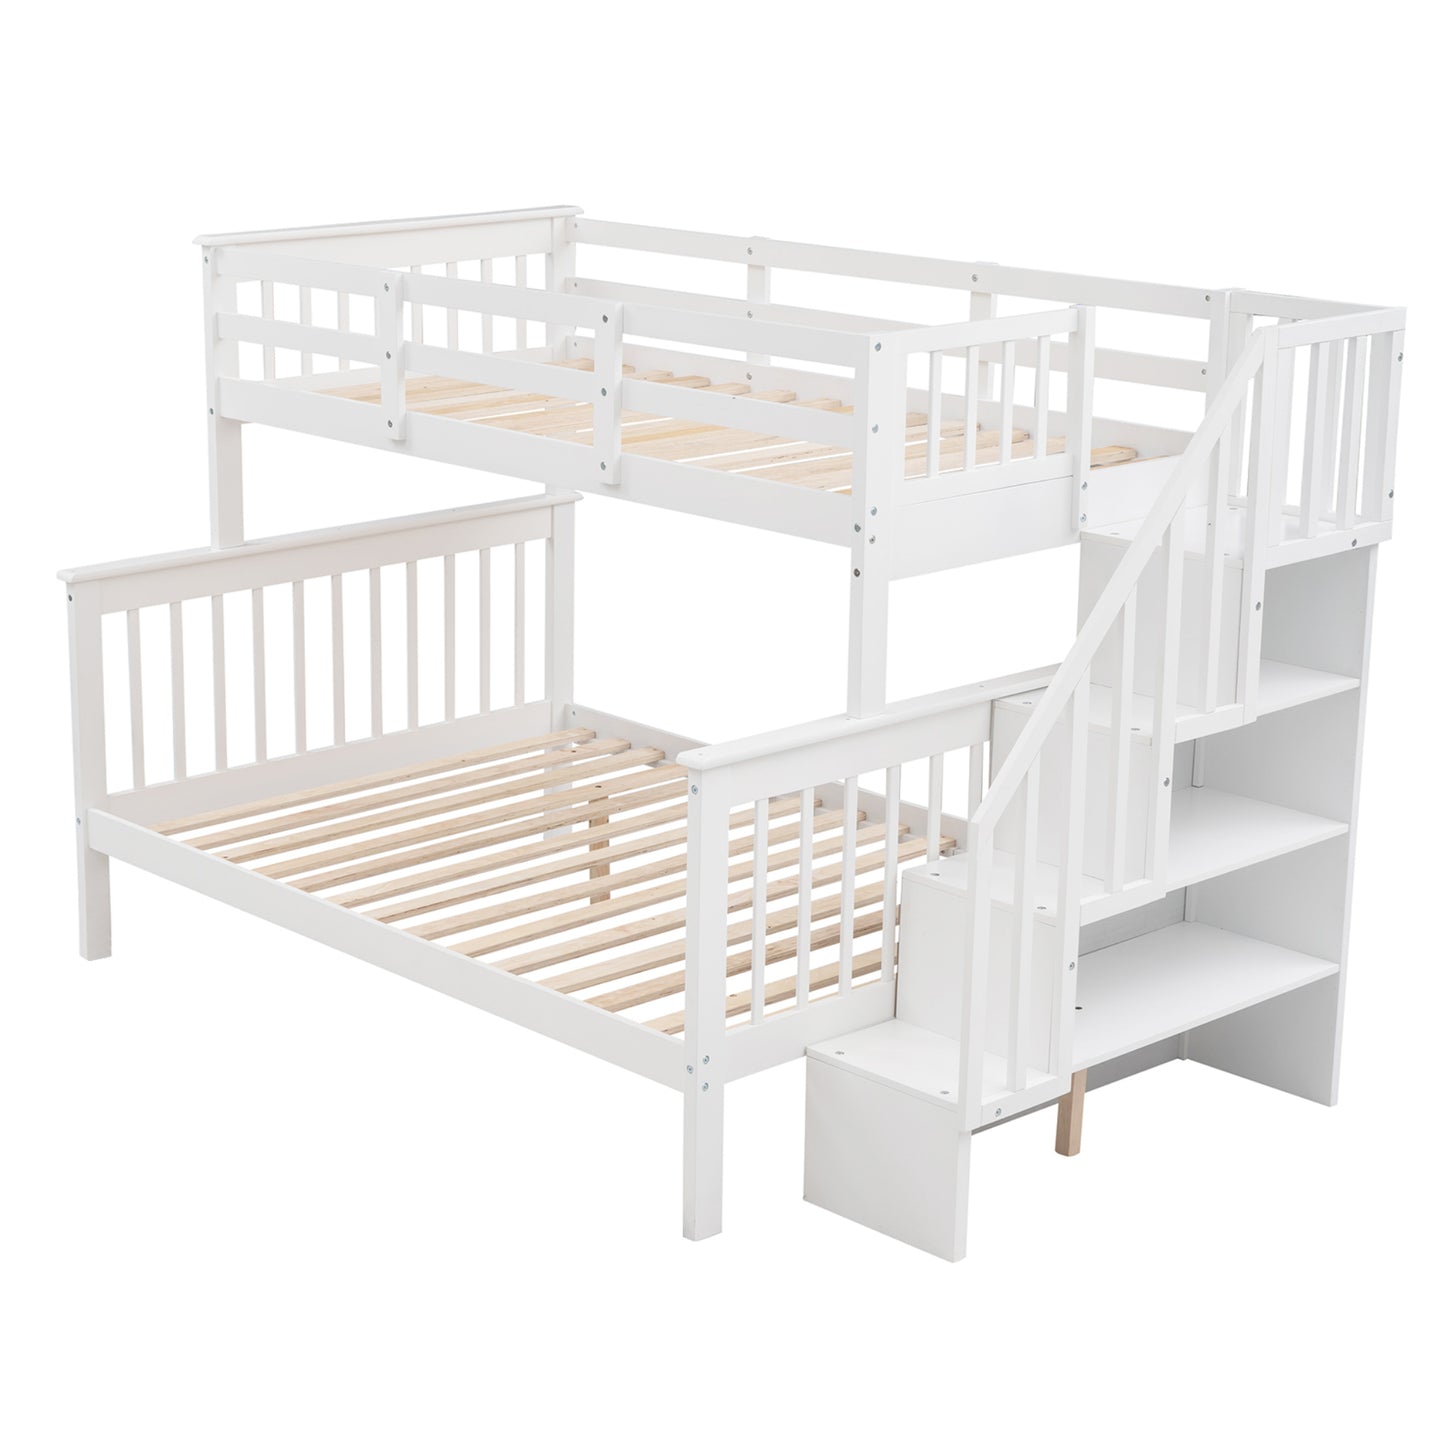 Stairway Twin-Over-Full Bunk Bed with Storage and Guard Rail for Bedroom, White color